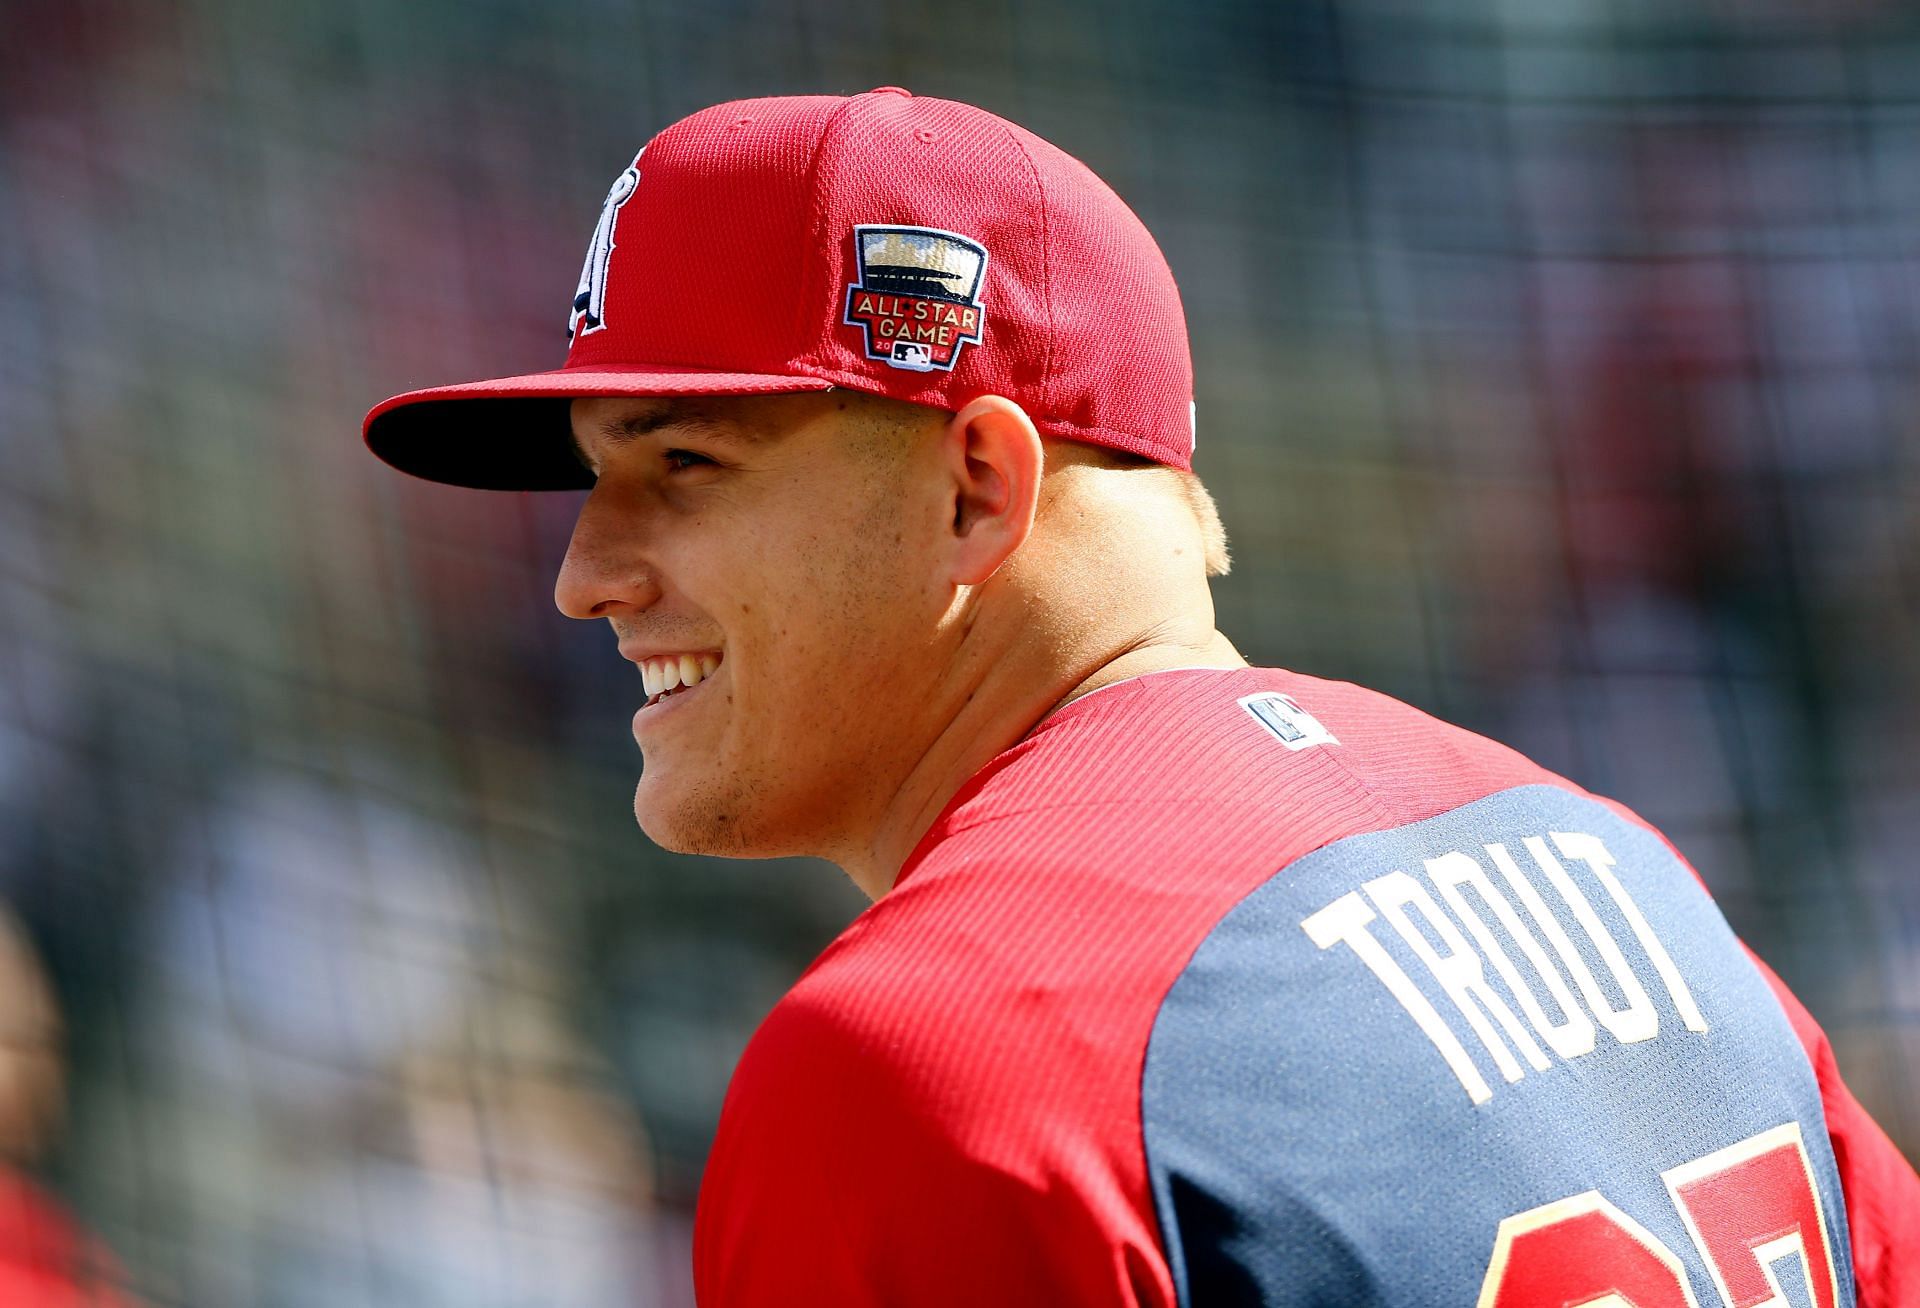 Mike Trout during the 85th MLB All Star Game in which he won the All-Star Game MVP award